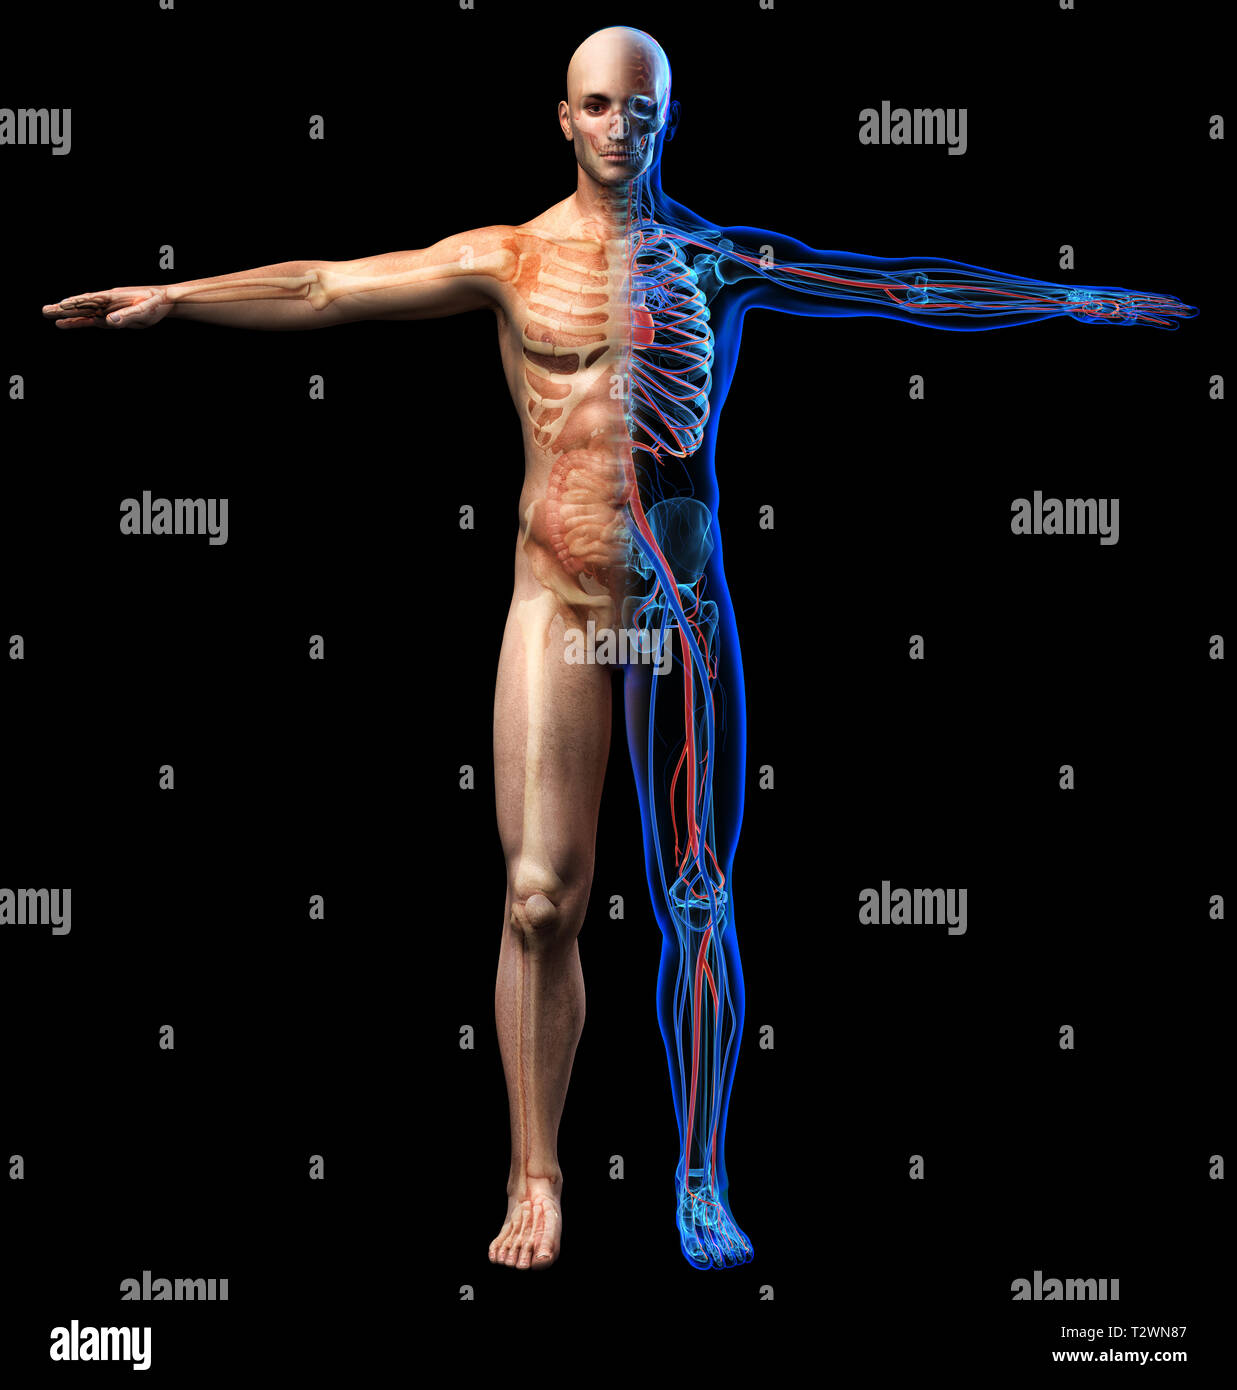 Man skeletal, internal organs diagram and x-ray cardiovascular system. Full figure standing on black background. Stock Photo